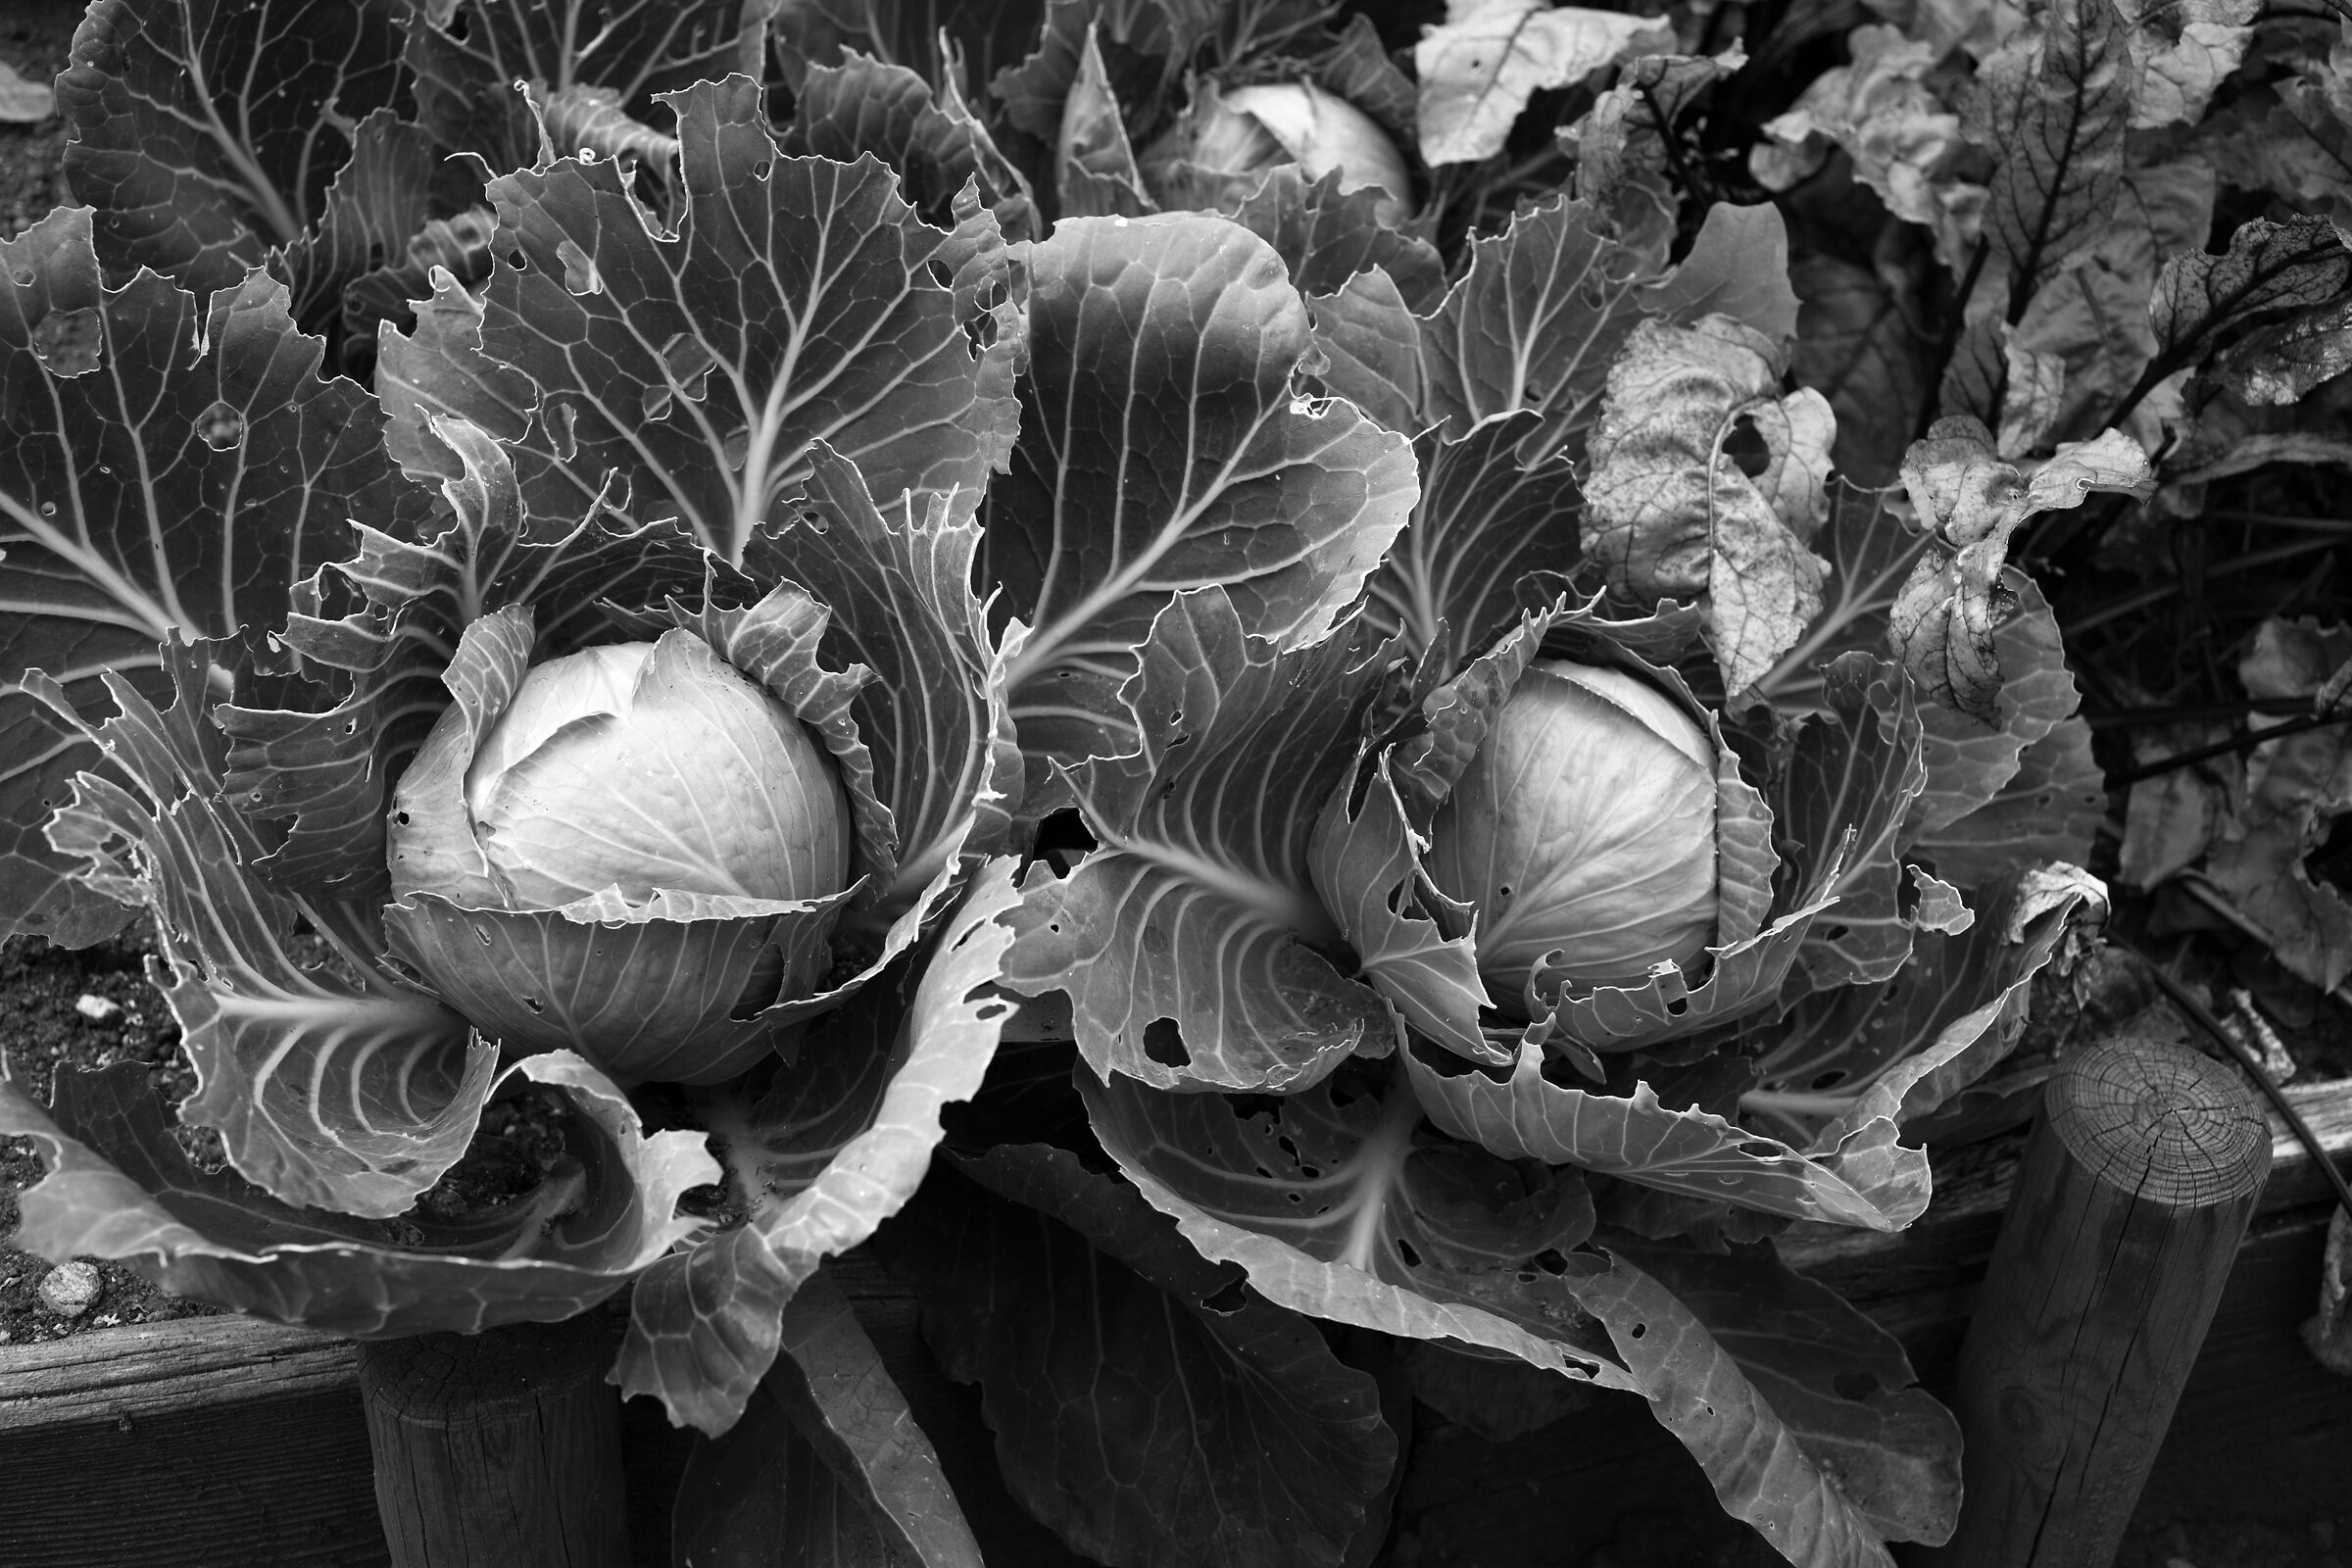 Cabbages...